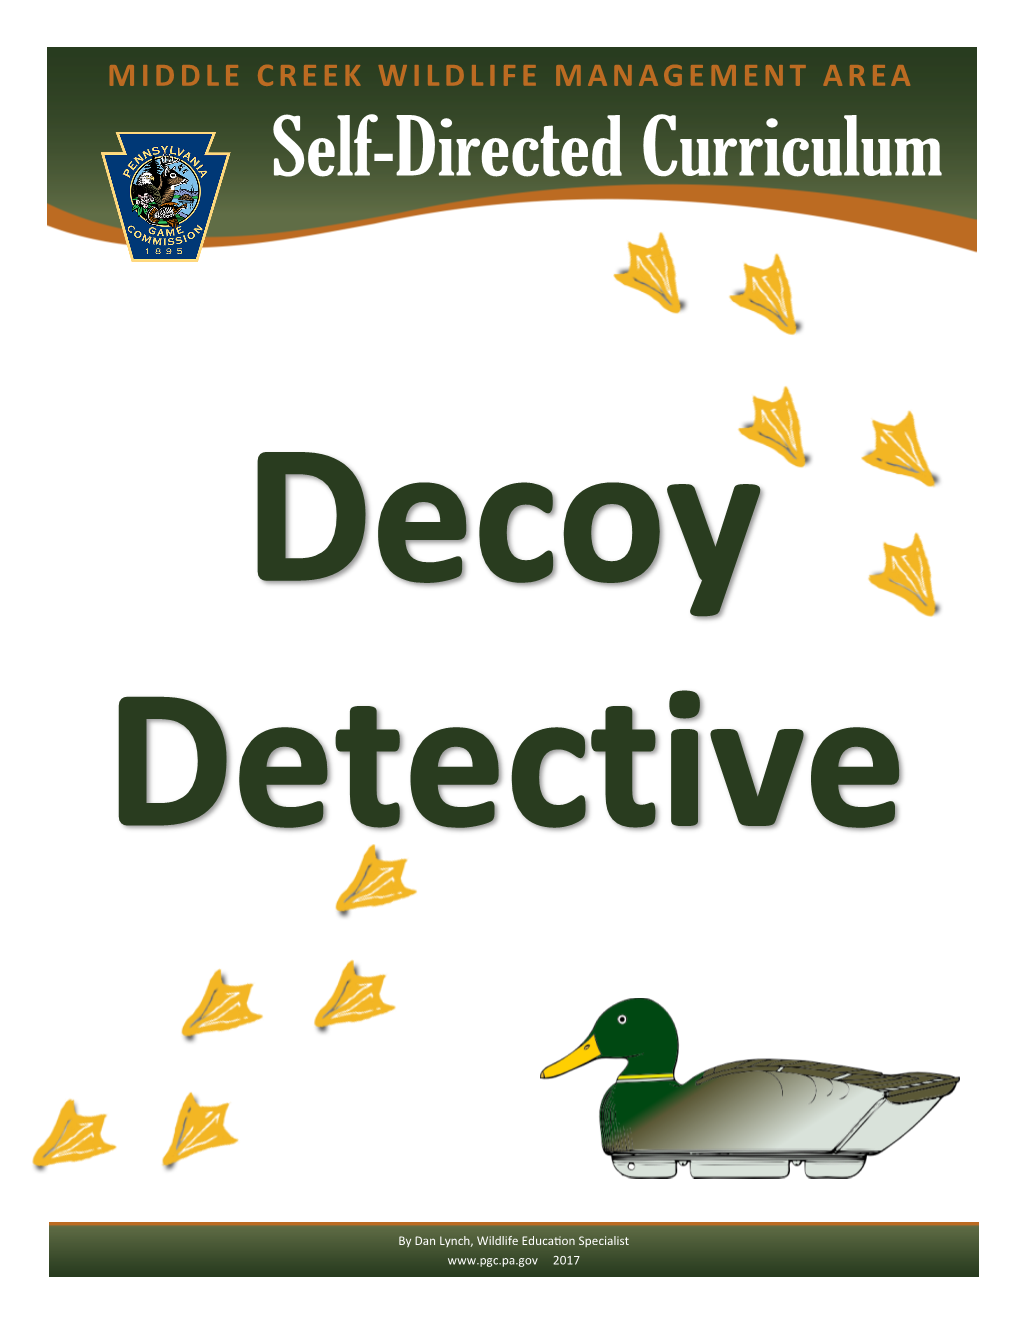 Decoy Detective Students Use the Decoys to Learn About Waterfowl Identification and Divide Birds Into a Diver Or Puddle Duck Classification